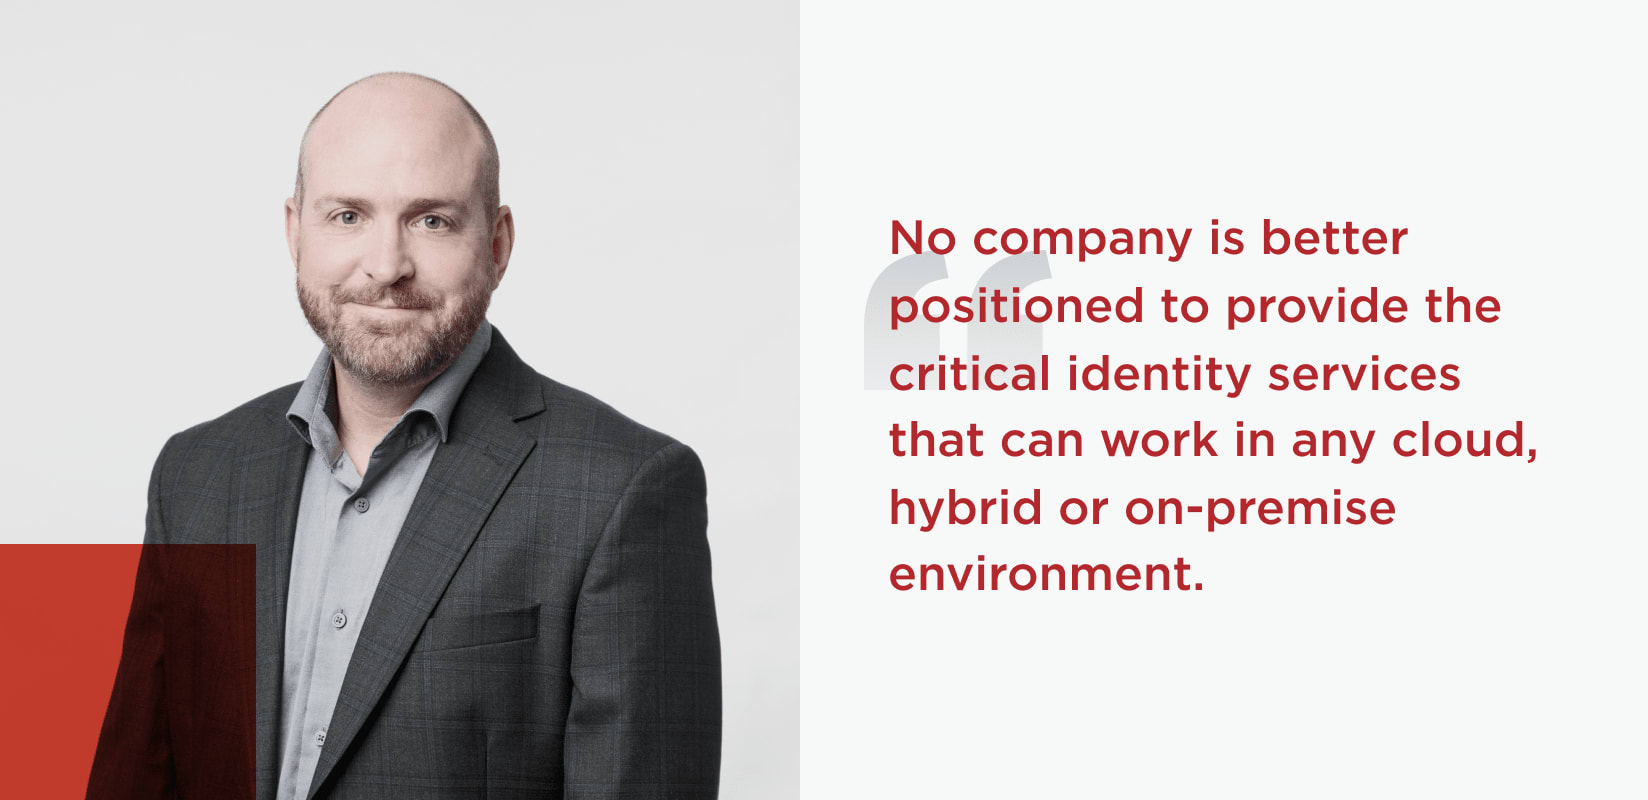 Decorative headshot of Ping Identity Chief Information Security Officer, Jason Kees, with the following quote 'No company is better positioned to provide the critical identity services that can work in any cloud, hybrid or on-premise environment.'